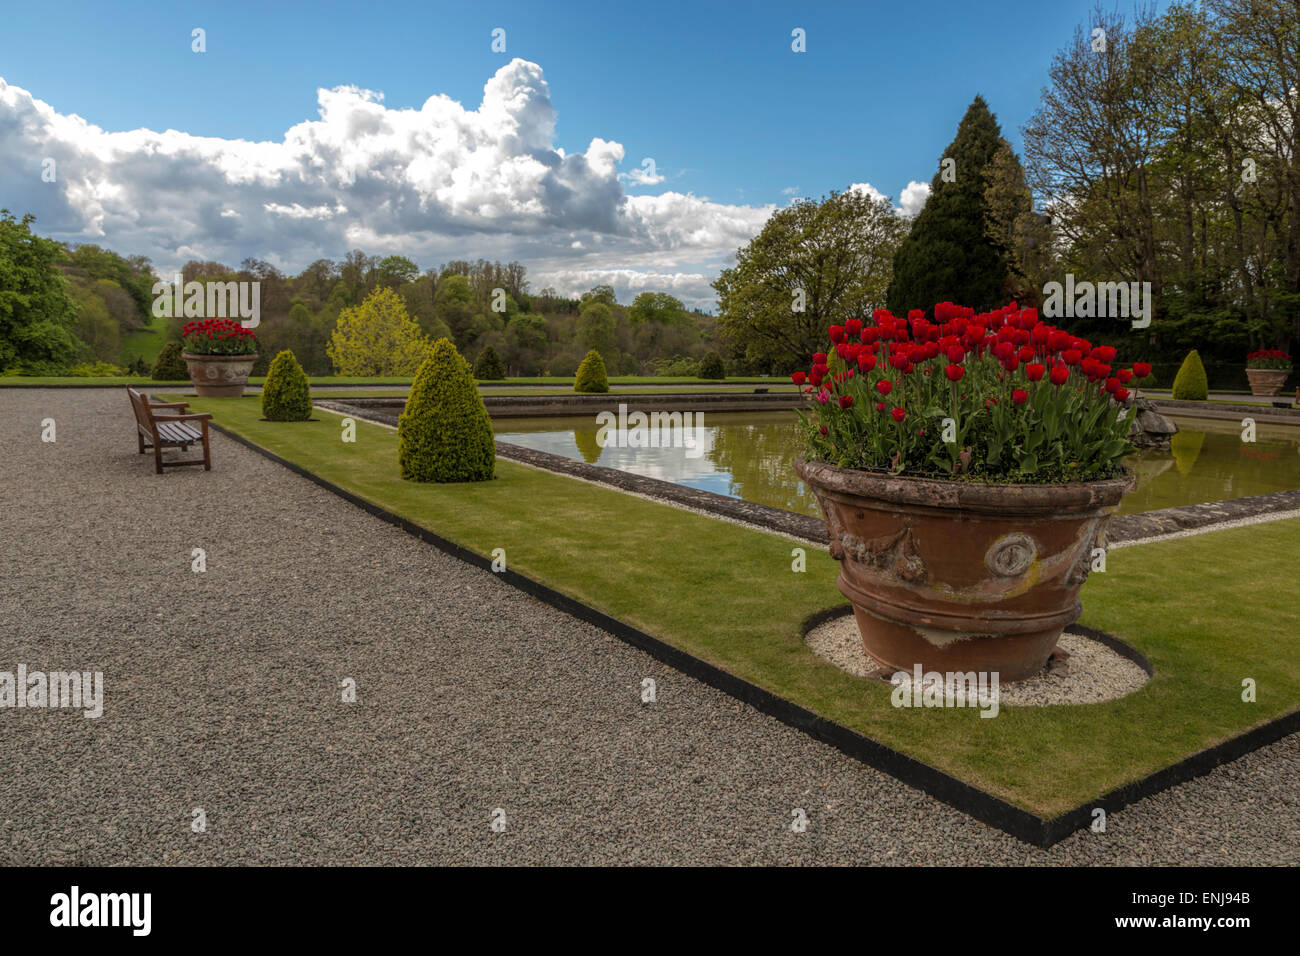 Spring mood in the landscaped Lower Water Terrace garden at Blenheim Palace, Woodstock, Oxfordshire, England, United Kingdom. Stock Photo